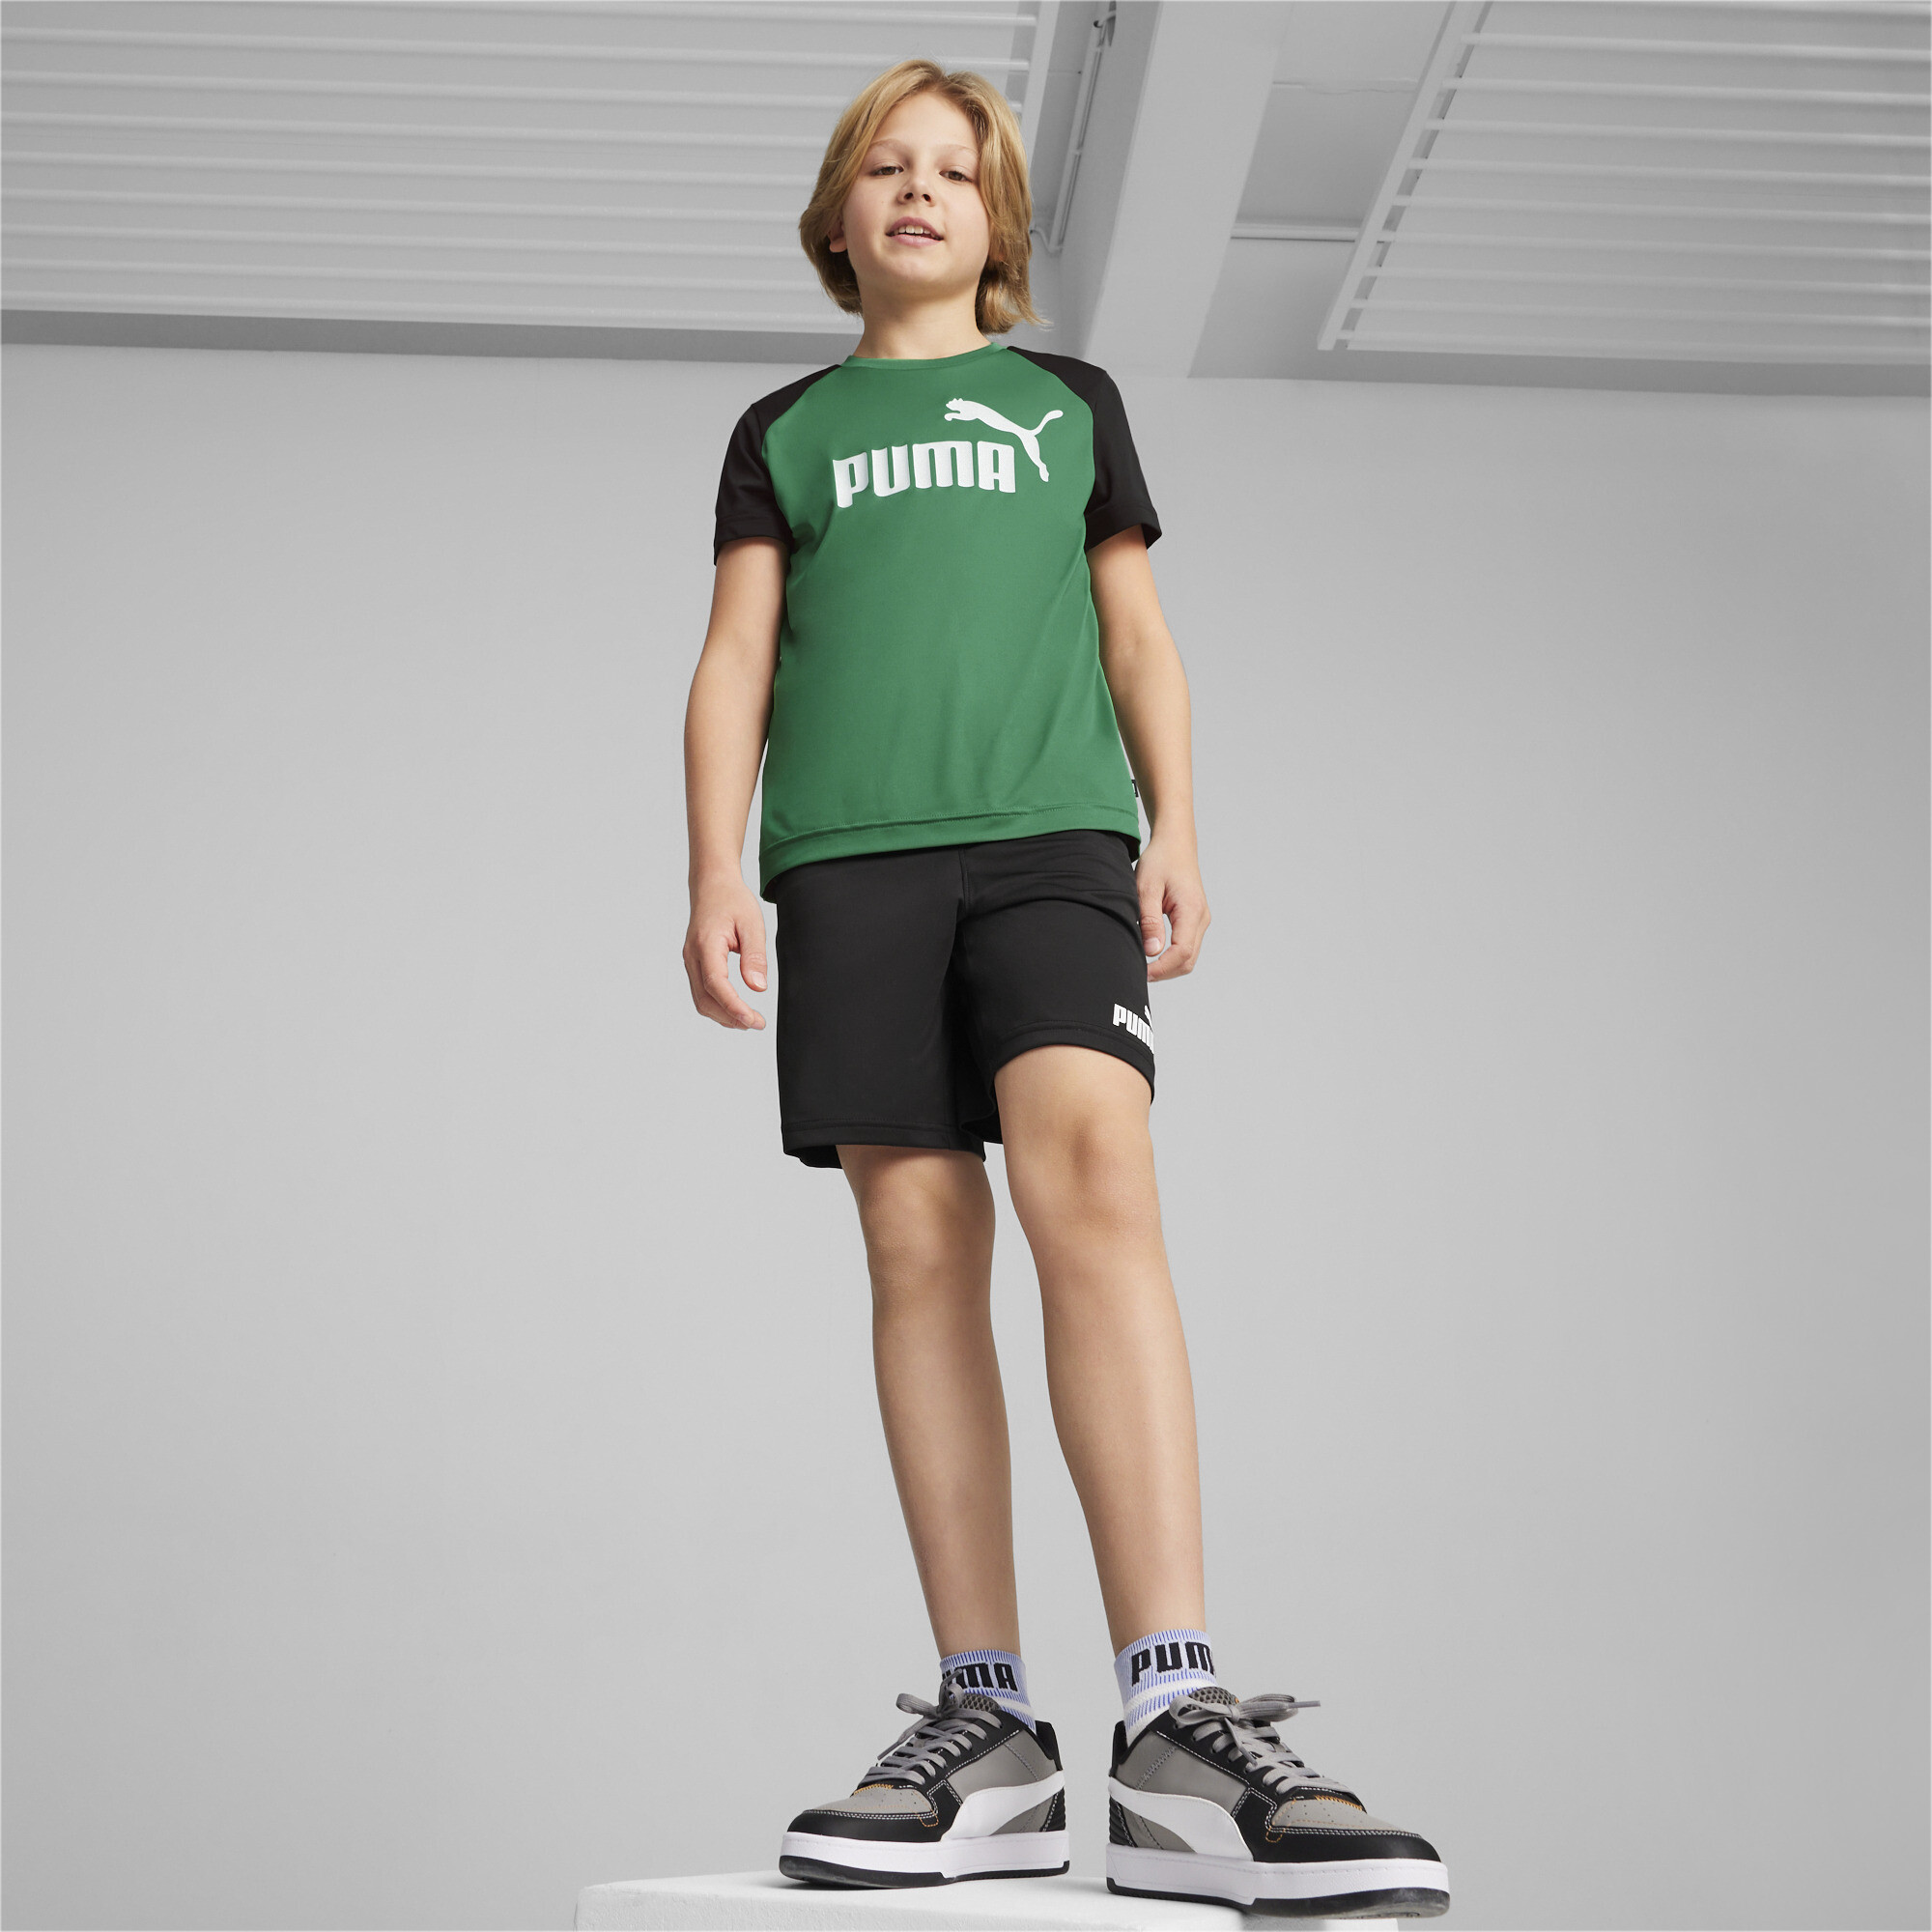 Men's Puma Polyester Youth Shorts Set, Green, Size 7-8Y, Clothing